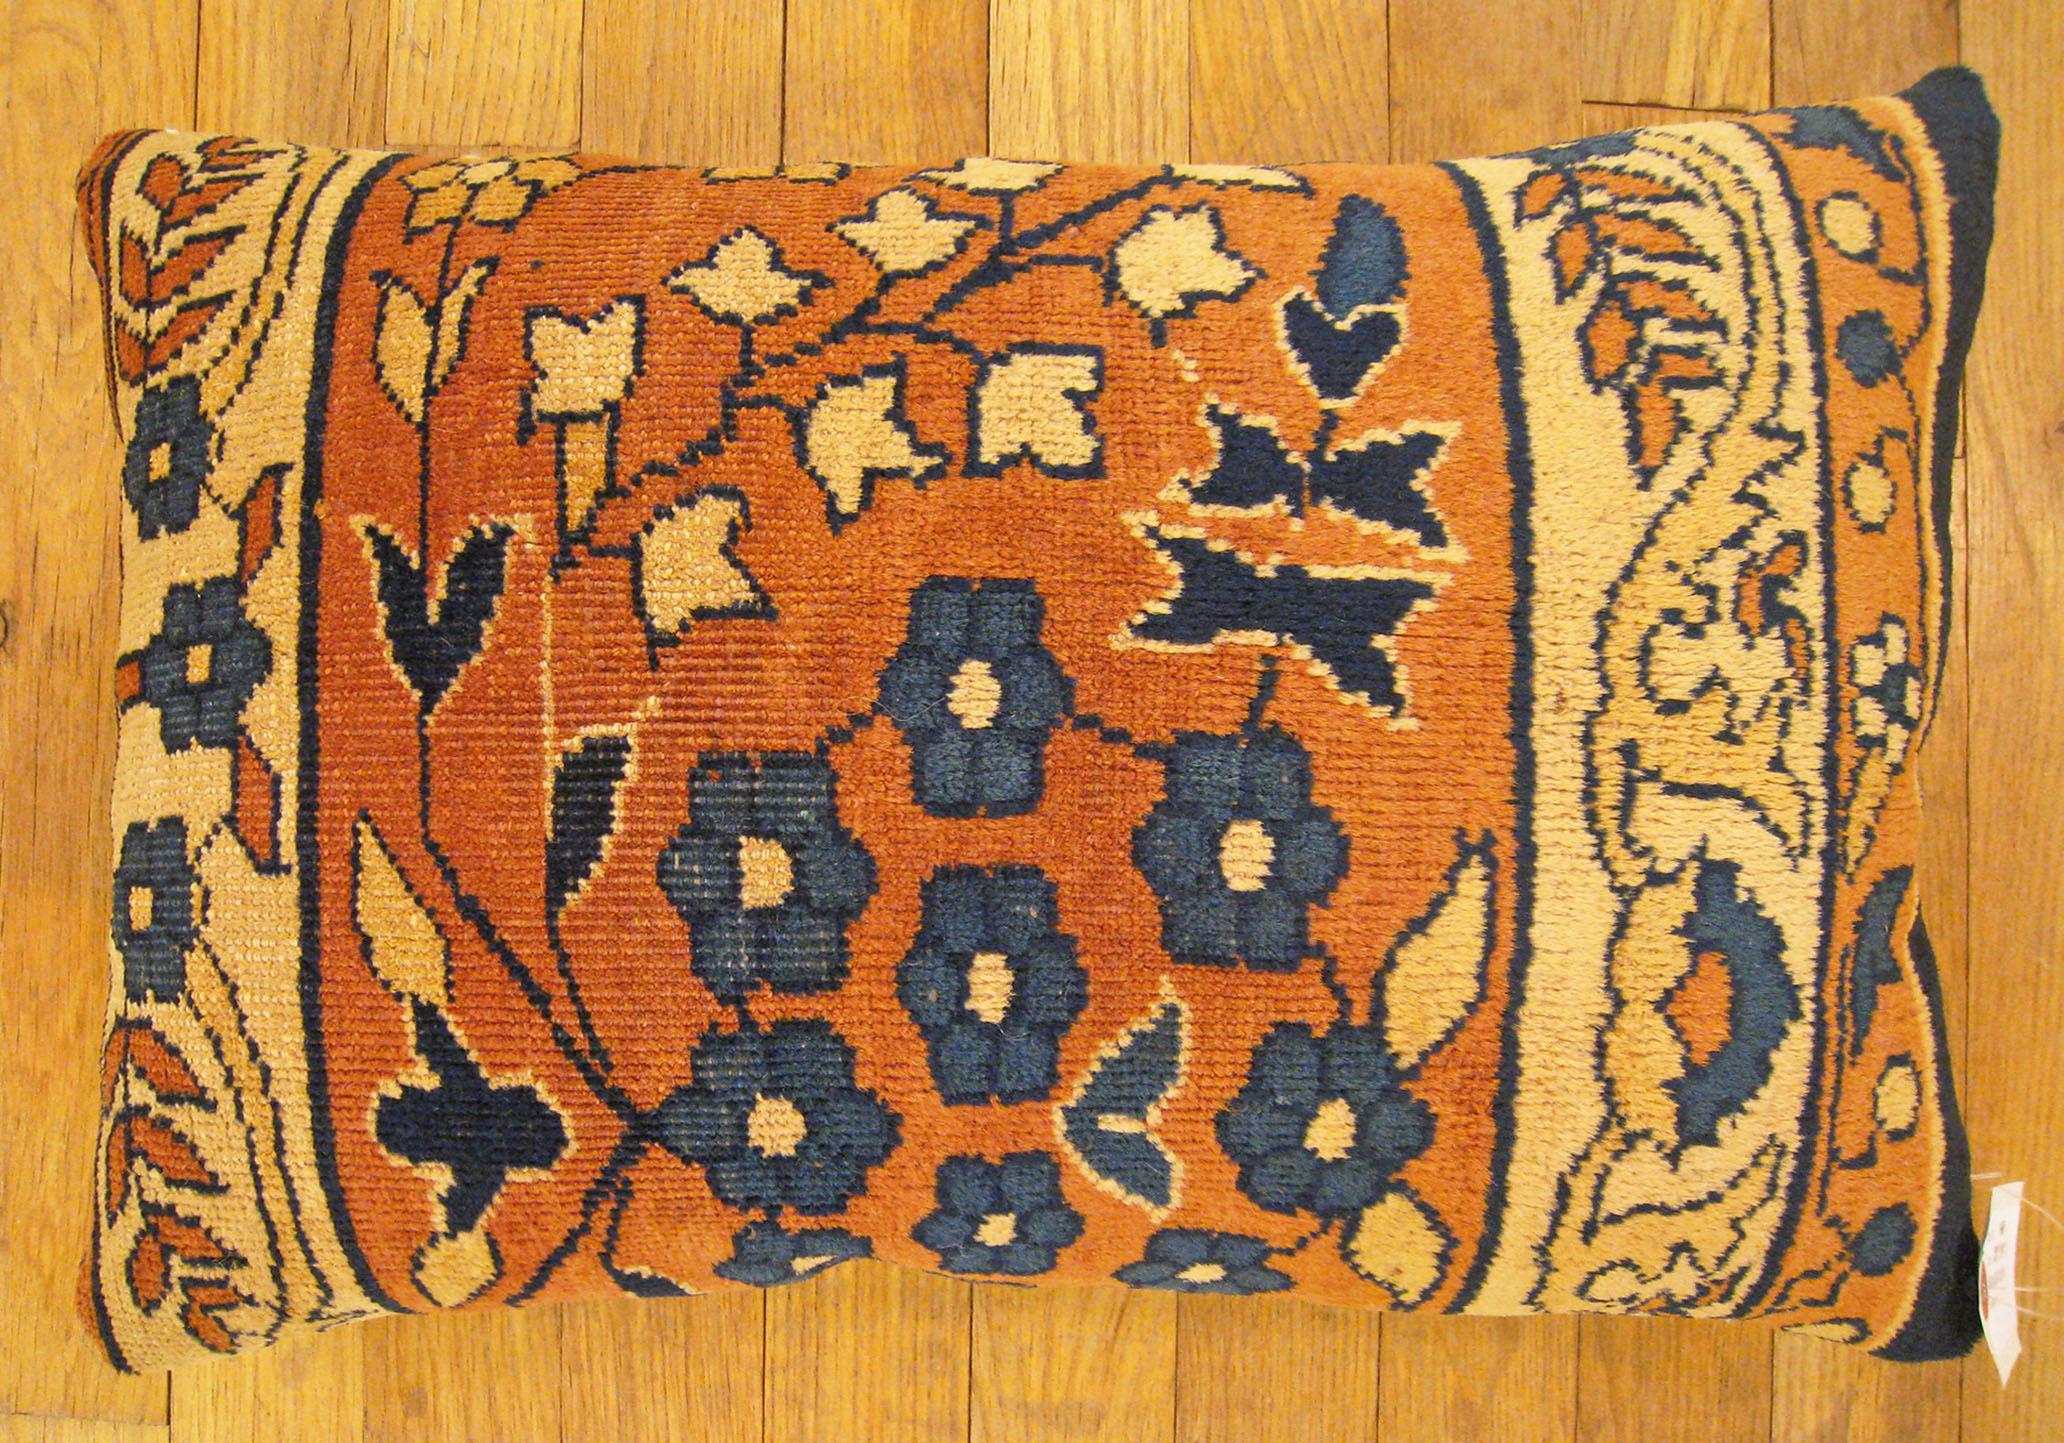 Antique Indian Agra rug pillow; size 1'8” x 1'2”.

An antique decorative pillow with floral elements allover a salmon central field, size 1'8” x 1'2”. This lovely decorative pillow features an antique fabric of a Agra rug on front which is